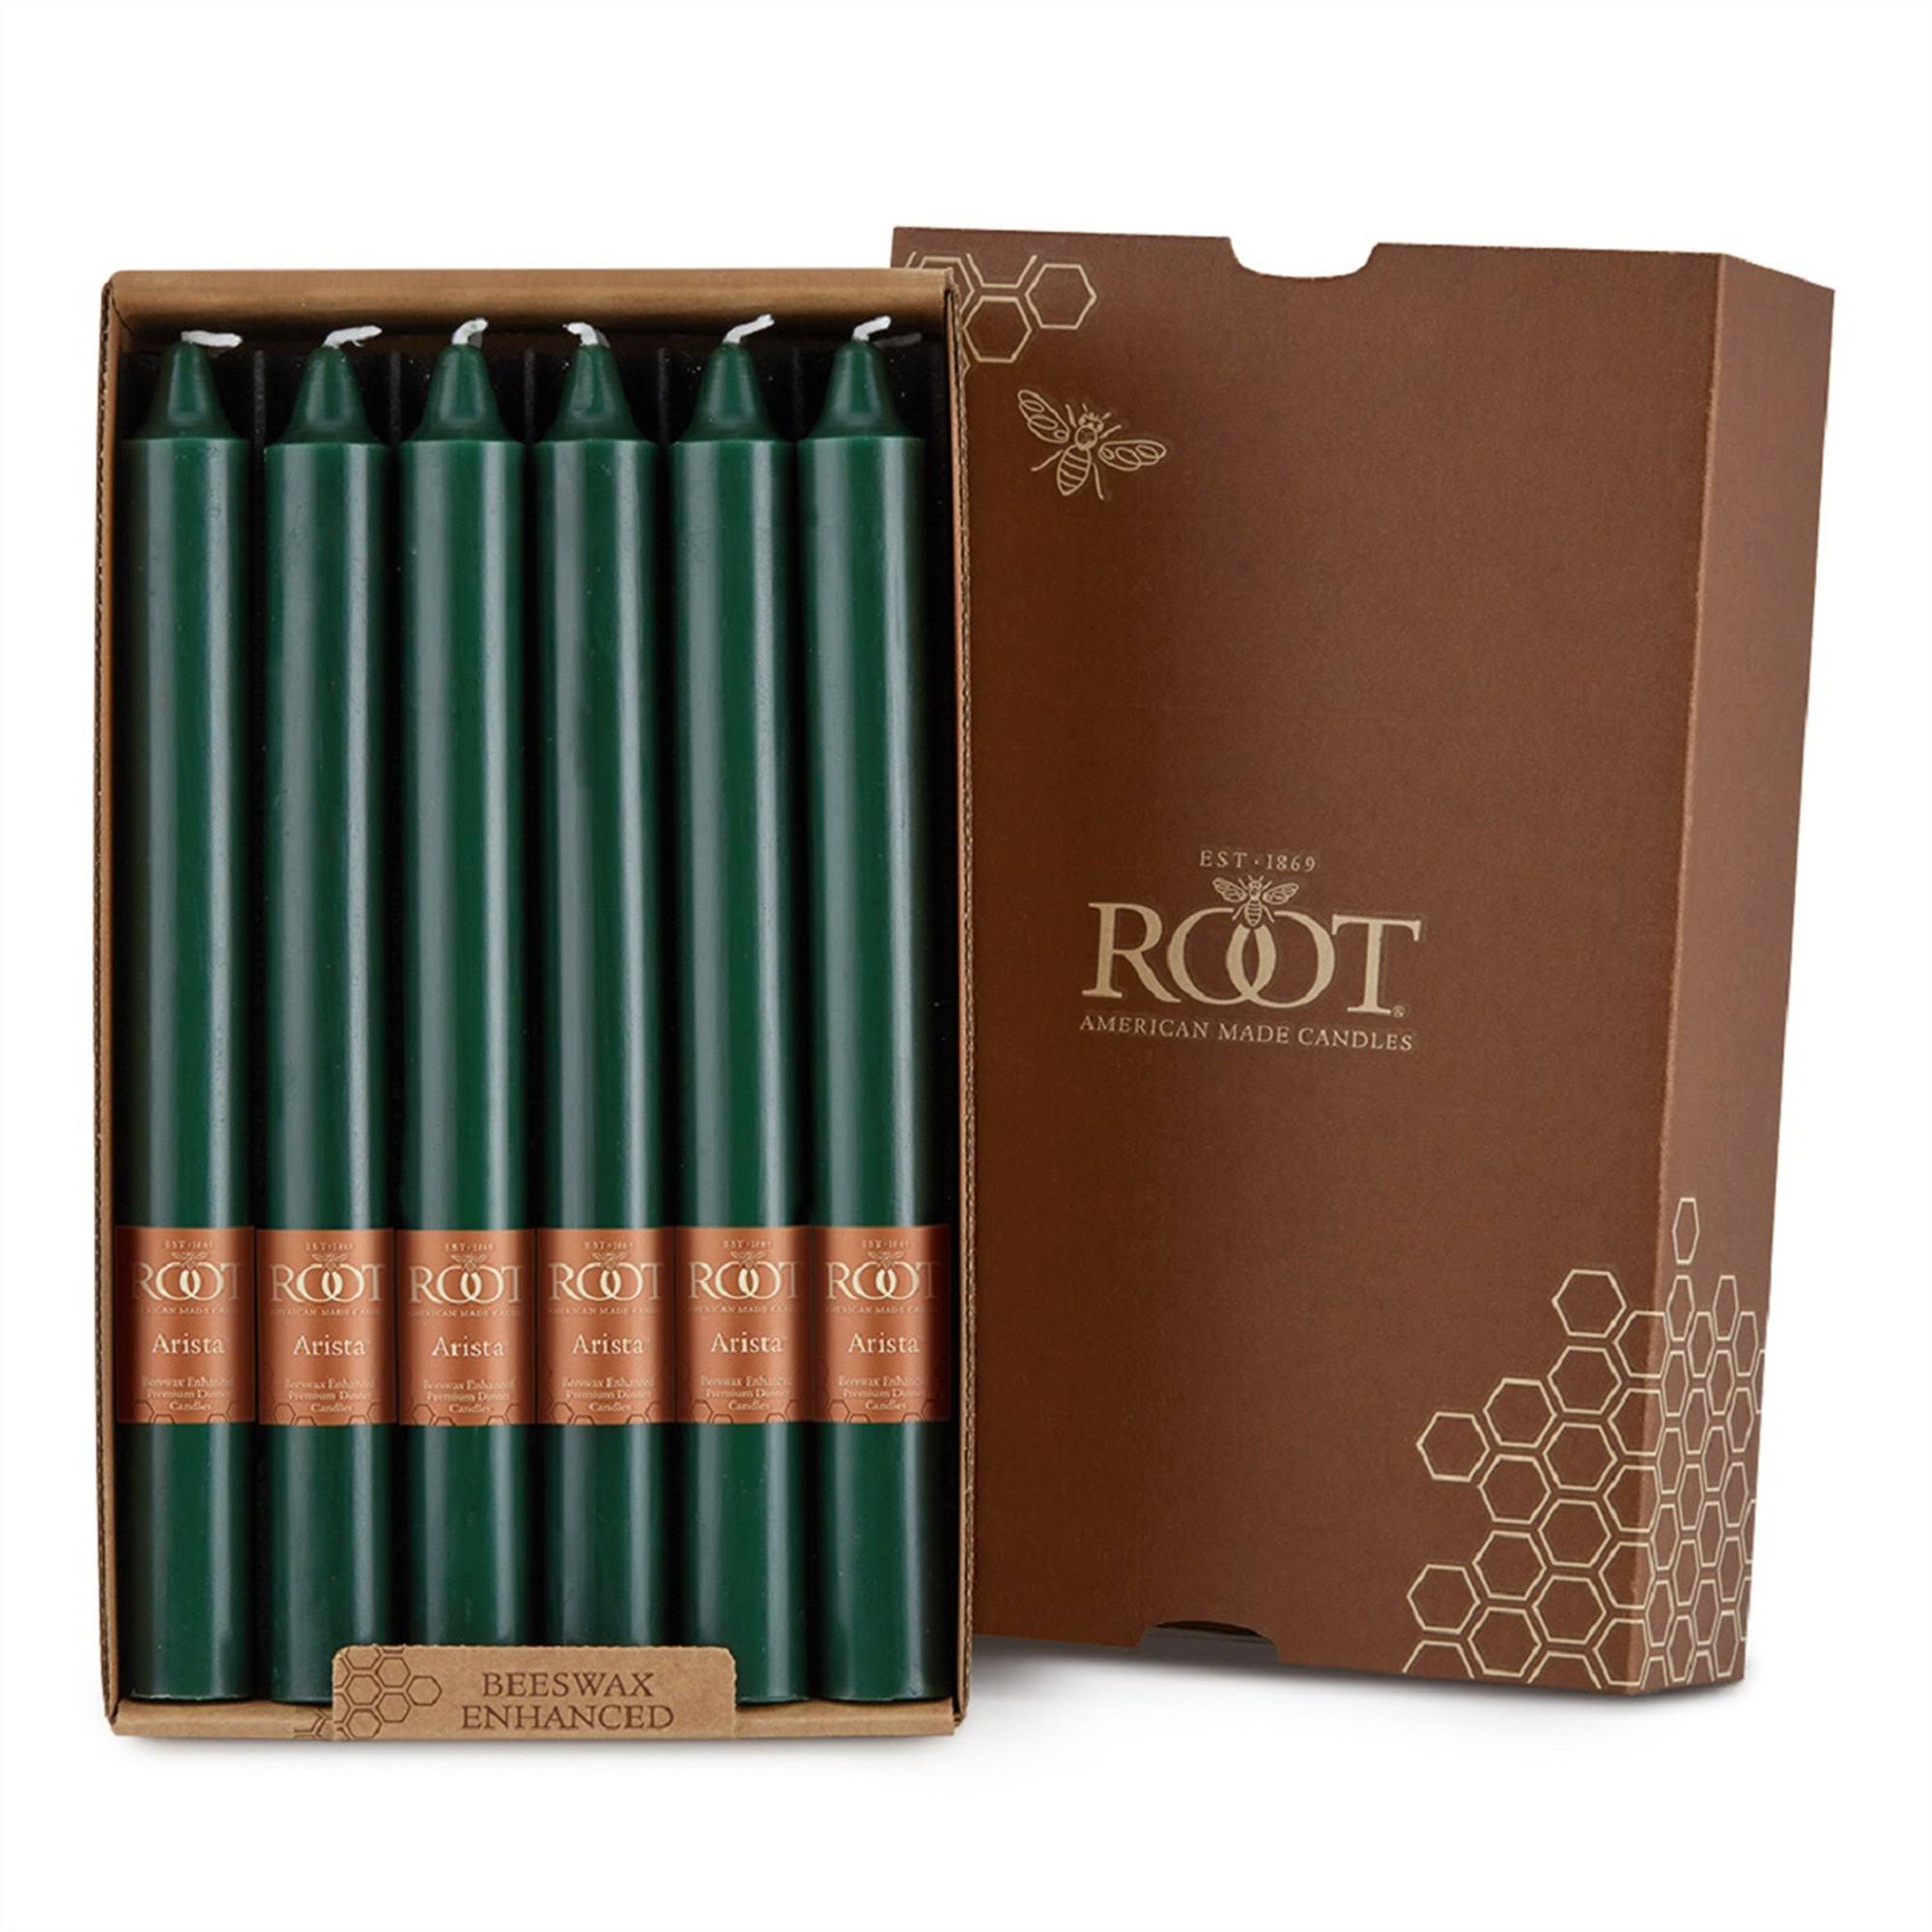 Root 9 inch Unscented Smooth Arista Taper Candles box of 12 - 9 x 7/8 - Dark Green